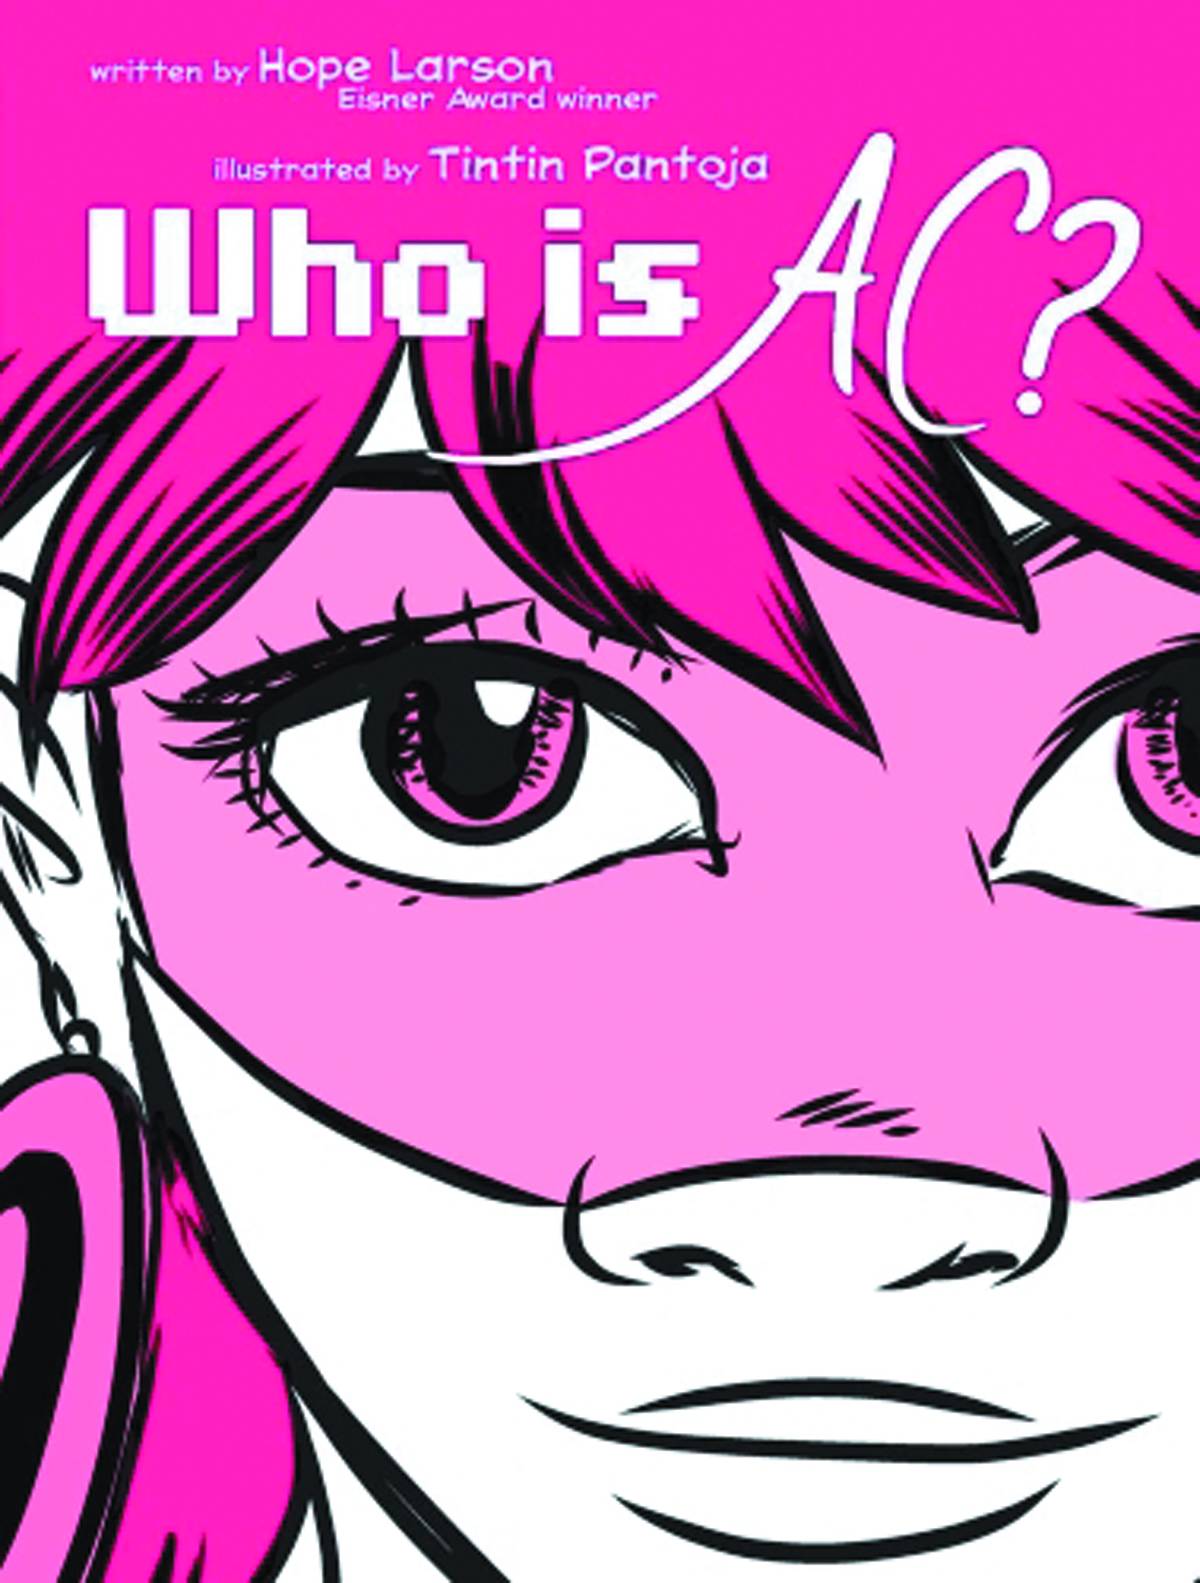 Who Is Ac Graphic Novel